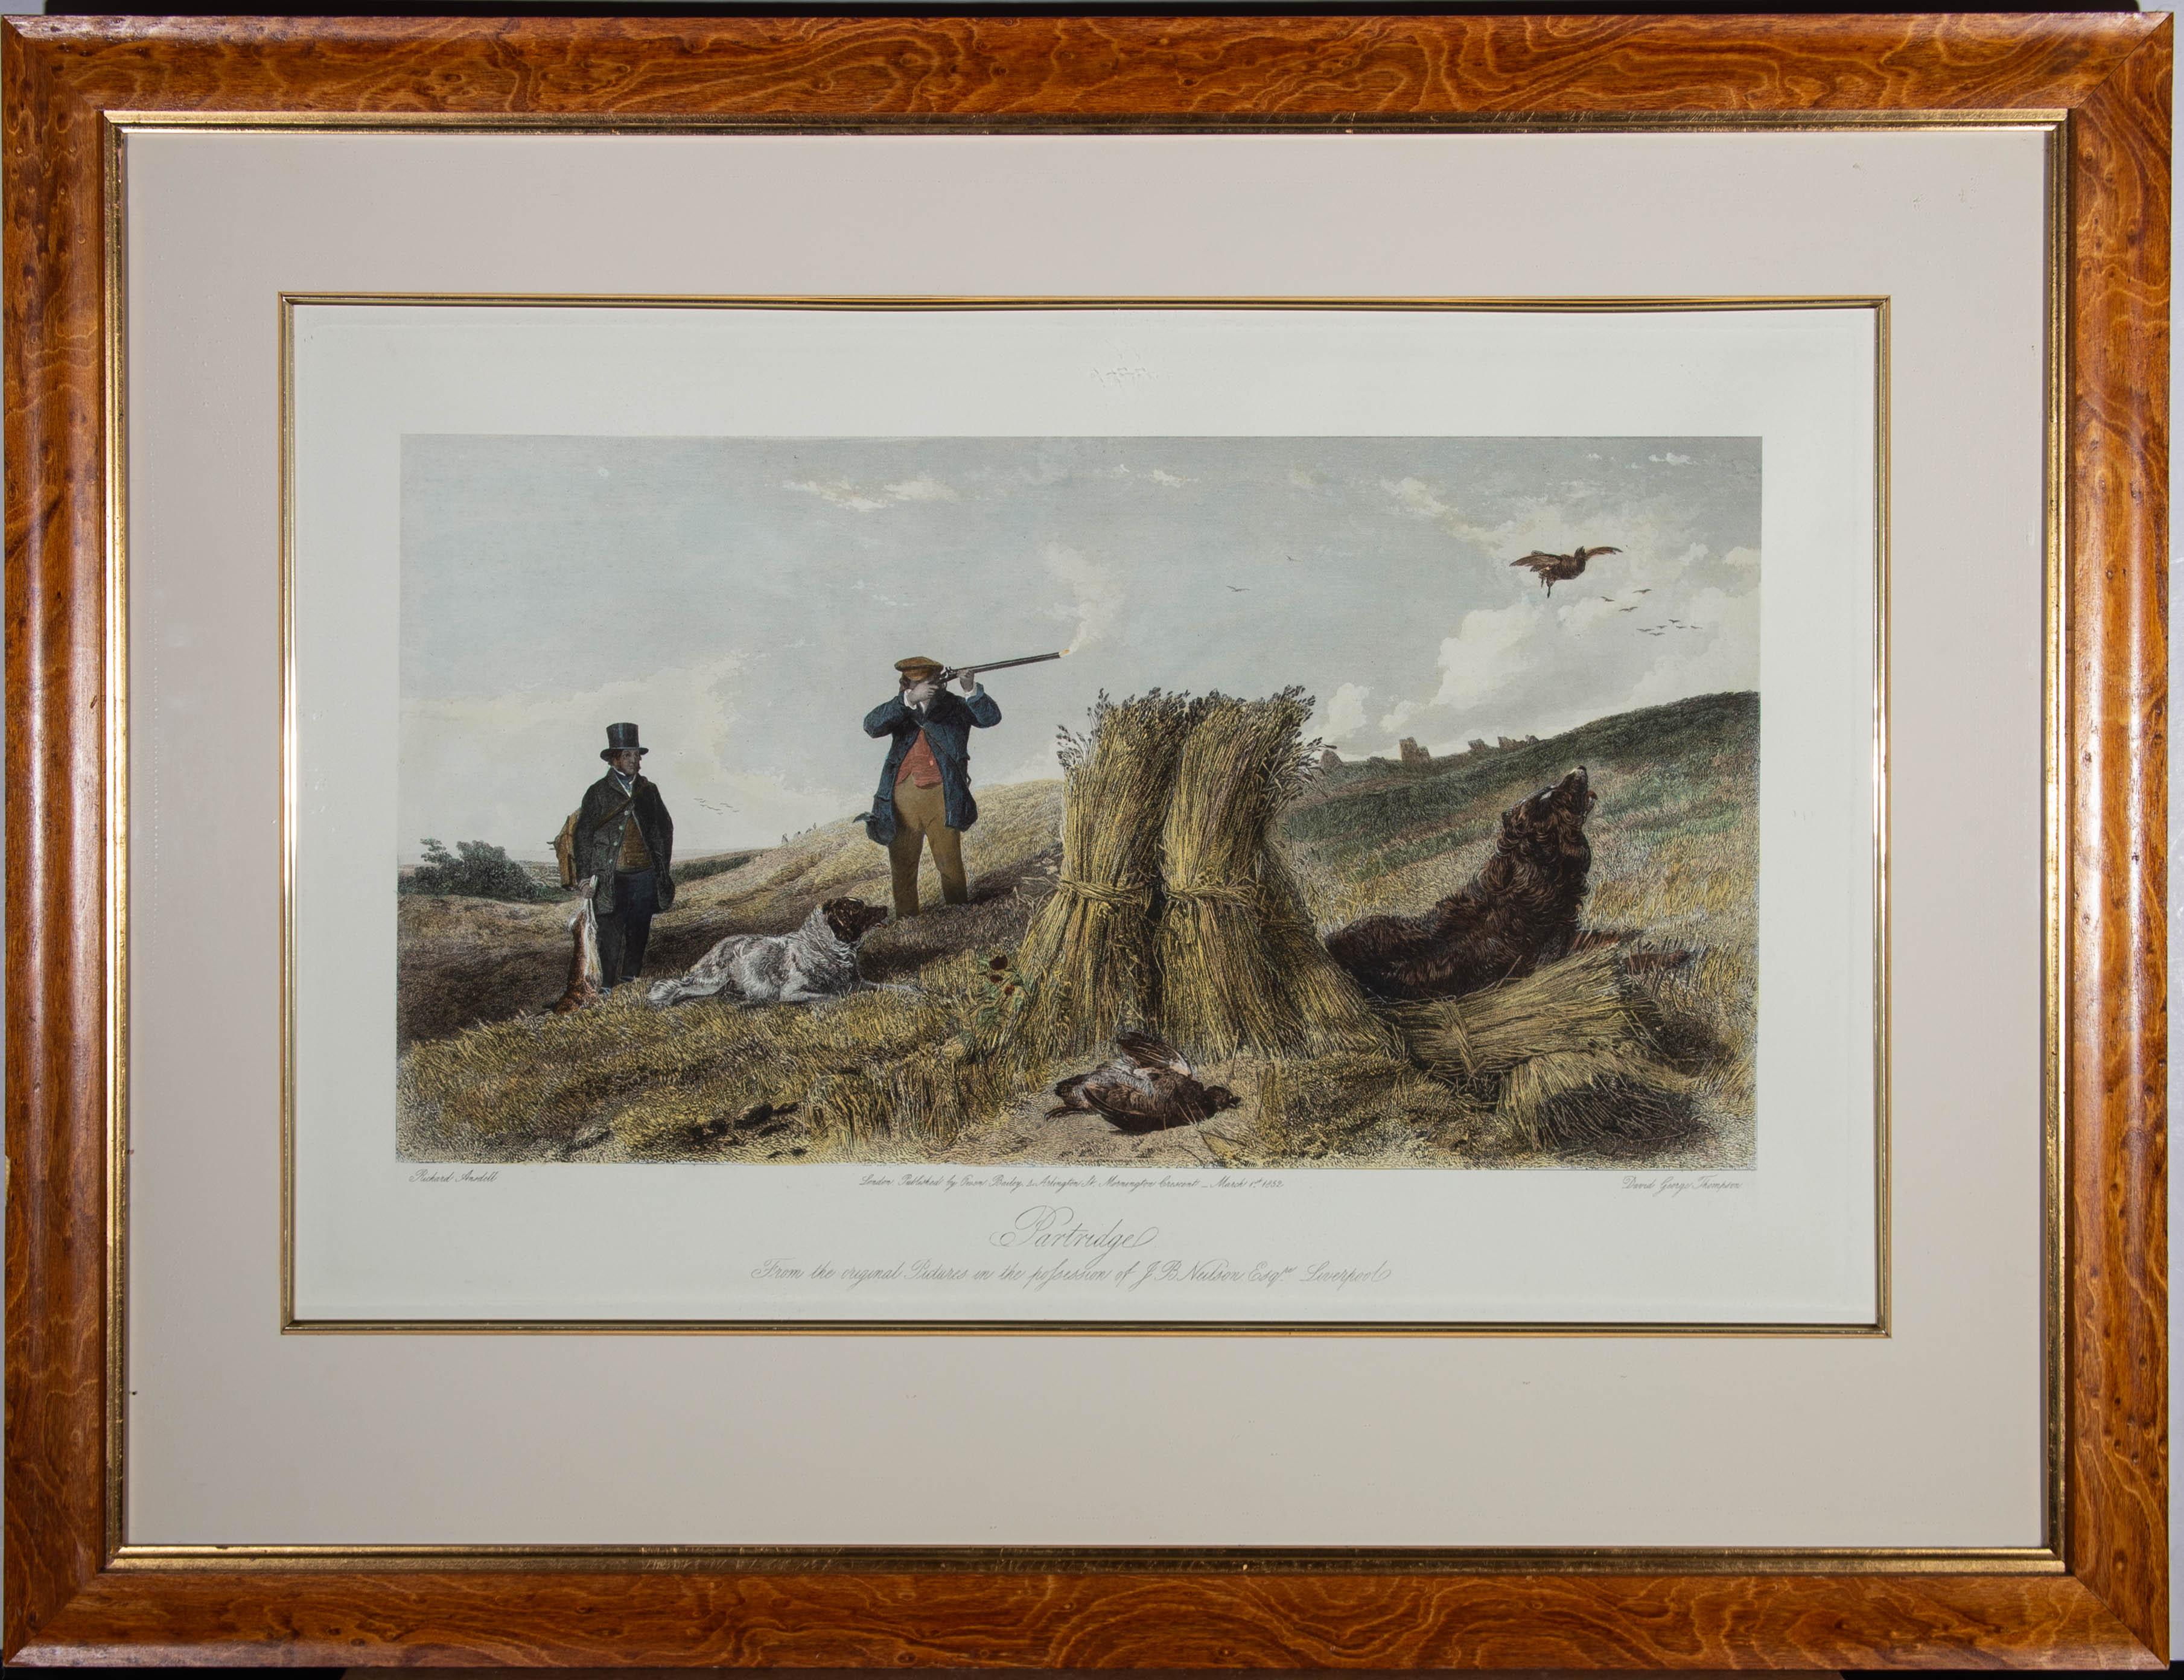 Depicting a partridge hunting scene with two gentlemen and their dogs. After the original painting by Richard Ansdell. Inscribed within the plate lines: 'Richard Ansdell - London, Published by Owen Bailey, 4 Arlington Street, Mornington Crescent -